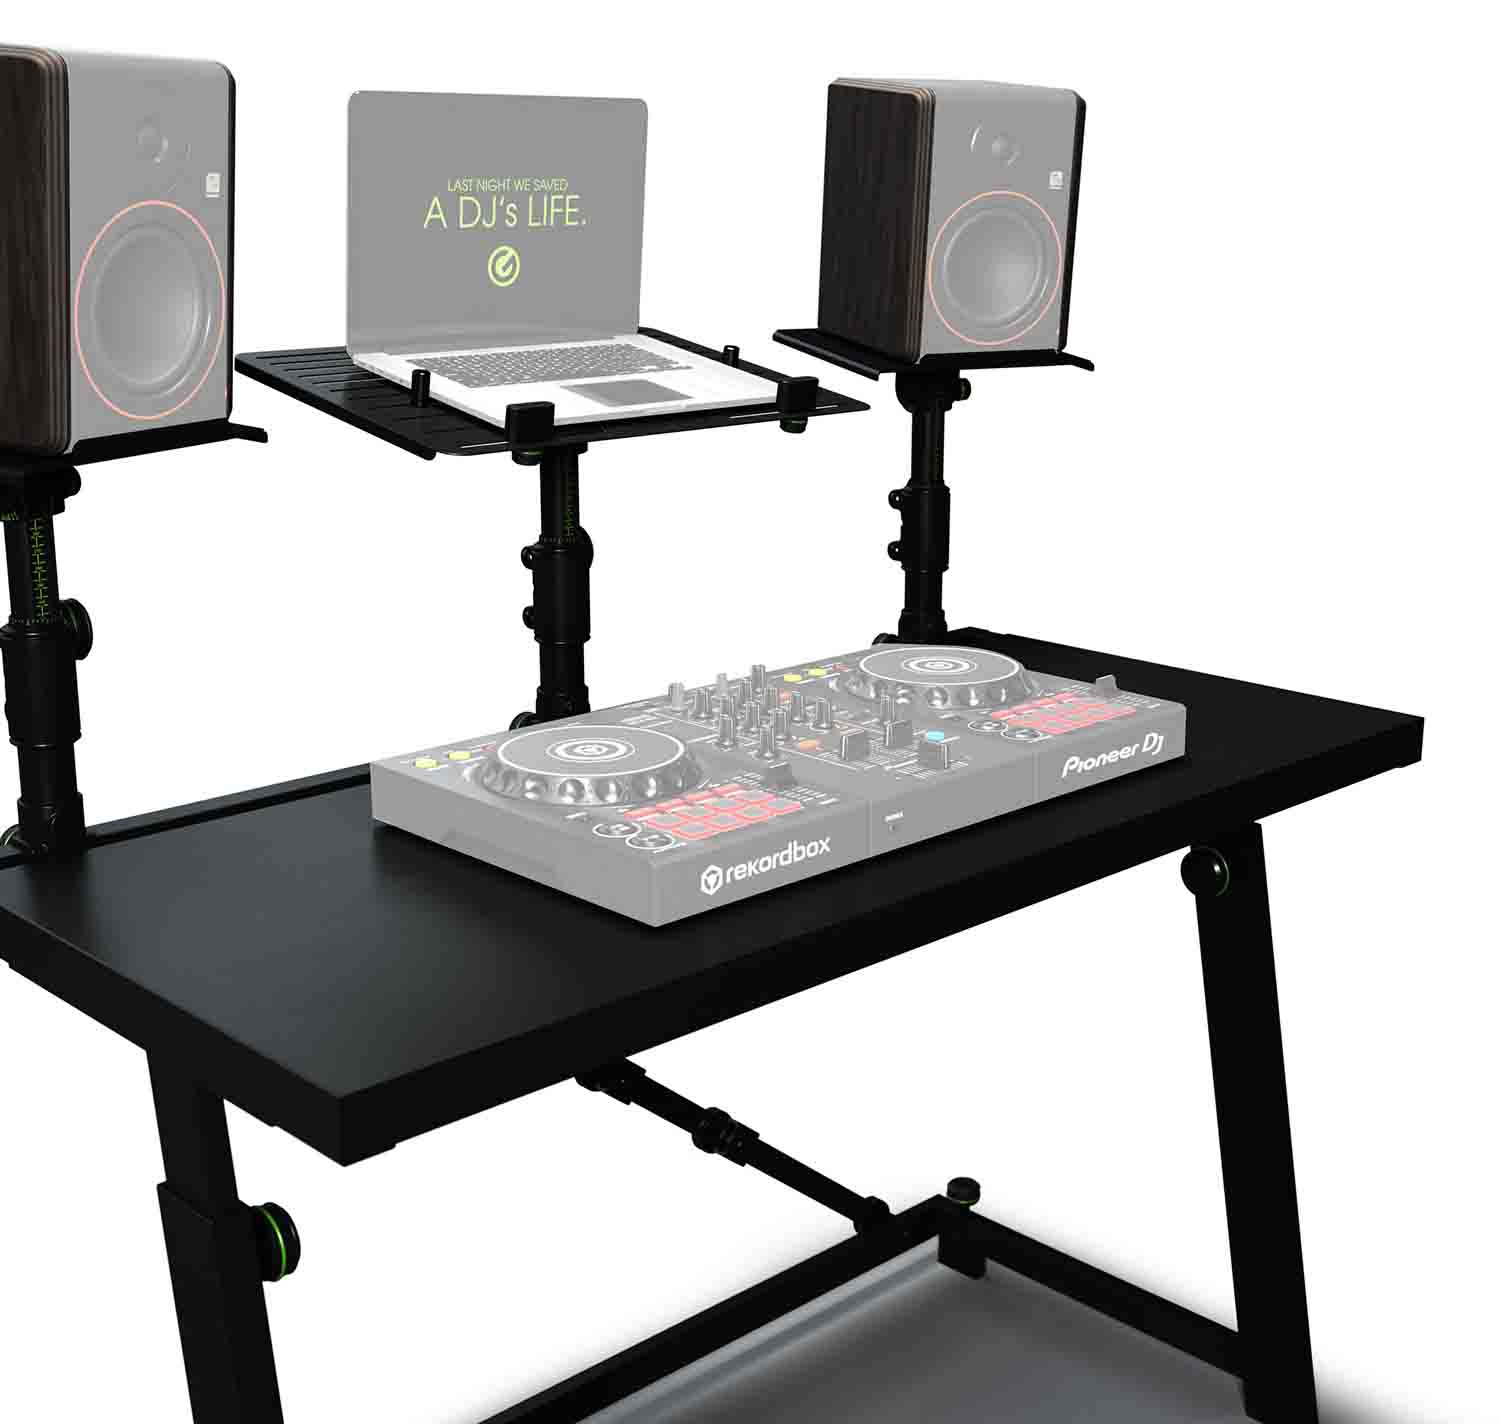 B-Stock: Gravity FDJT 01 DJ Desk with Adjustable Loudspeaker and Laptop Trays by GRAVITY STANDS